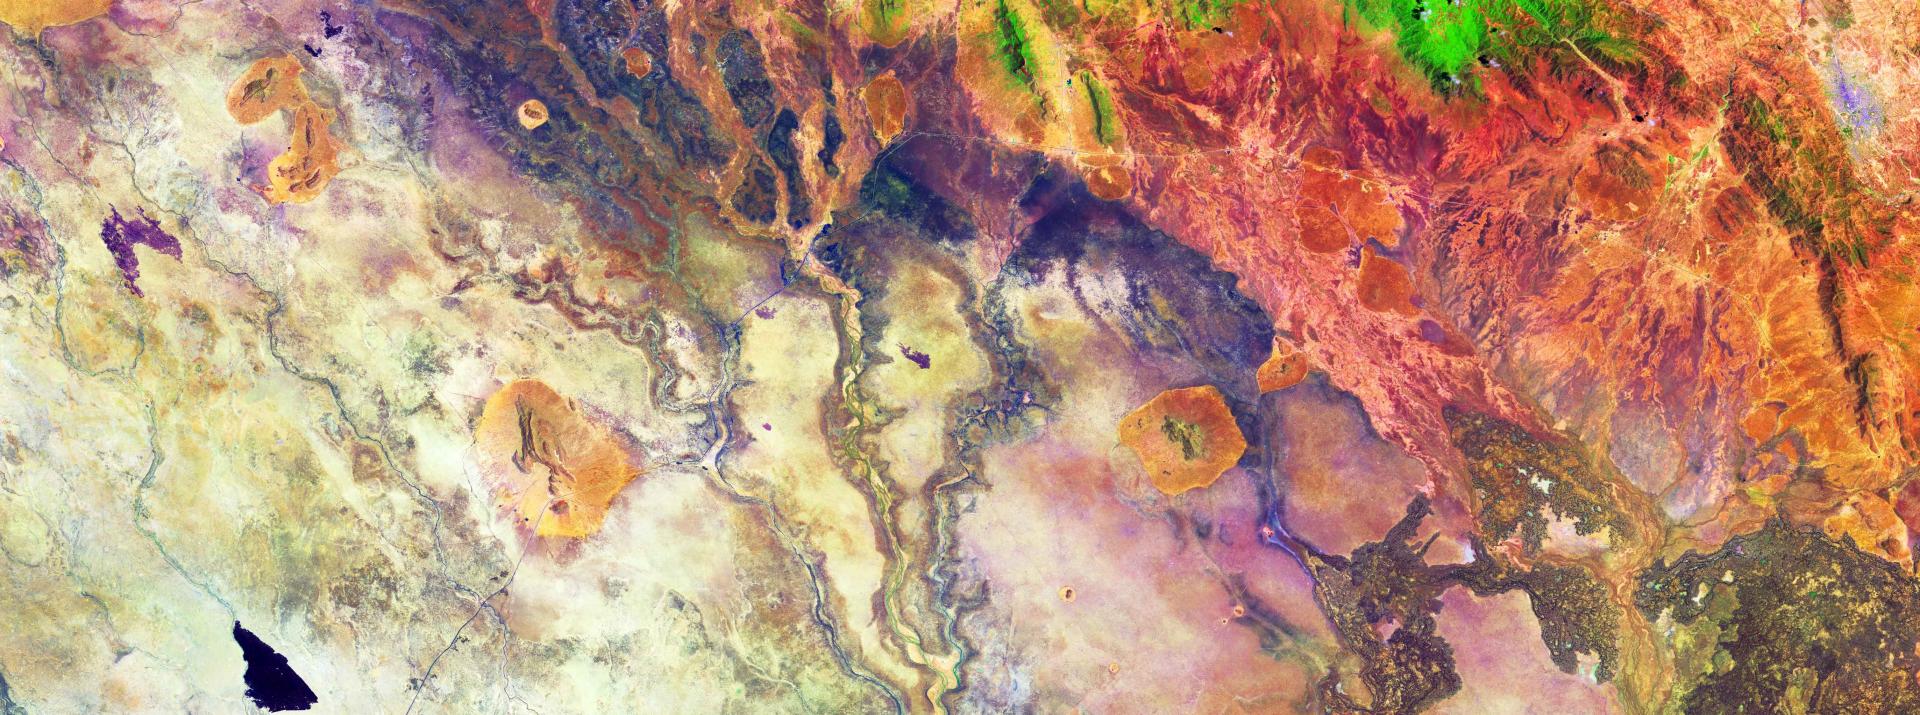 Captured on 1 October 2018 by the Copernicus Sentinel-2A satellite, this image features part of northeast Kenya – an area east of the East African Rift